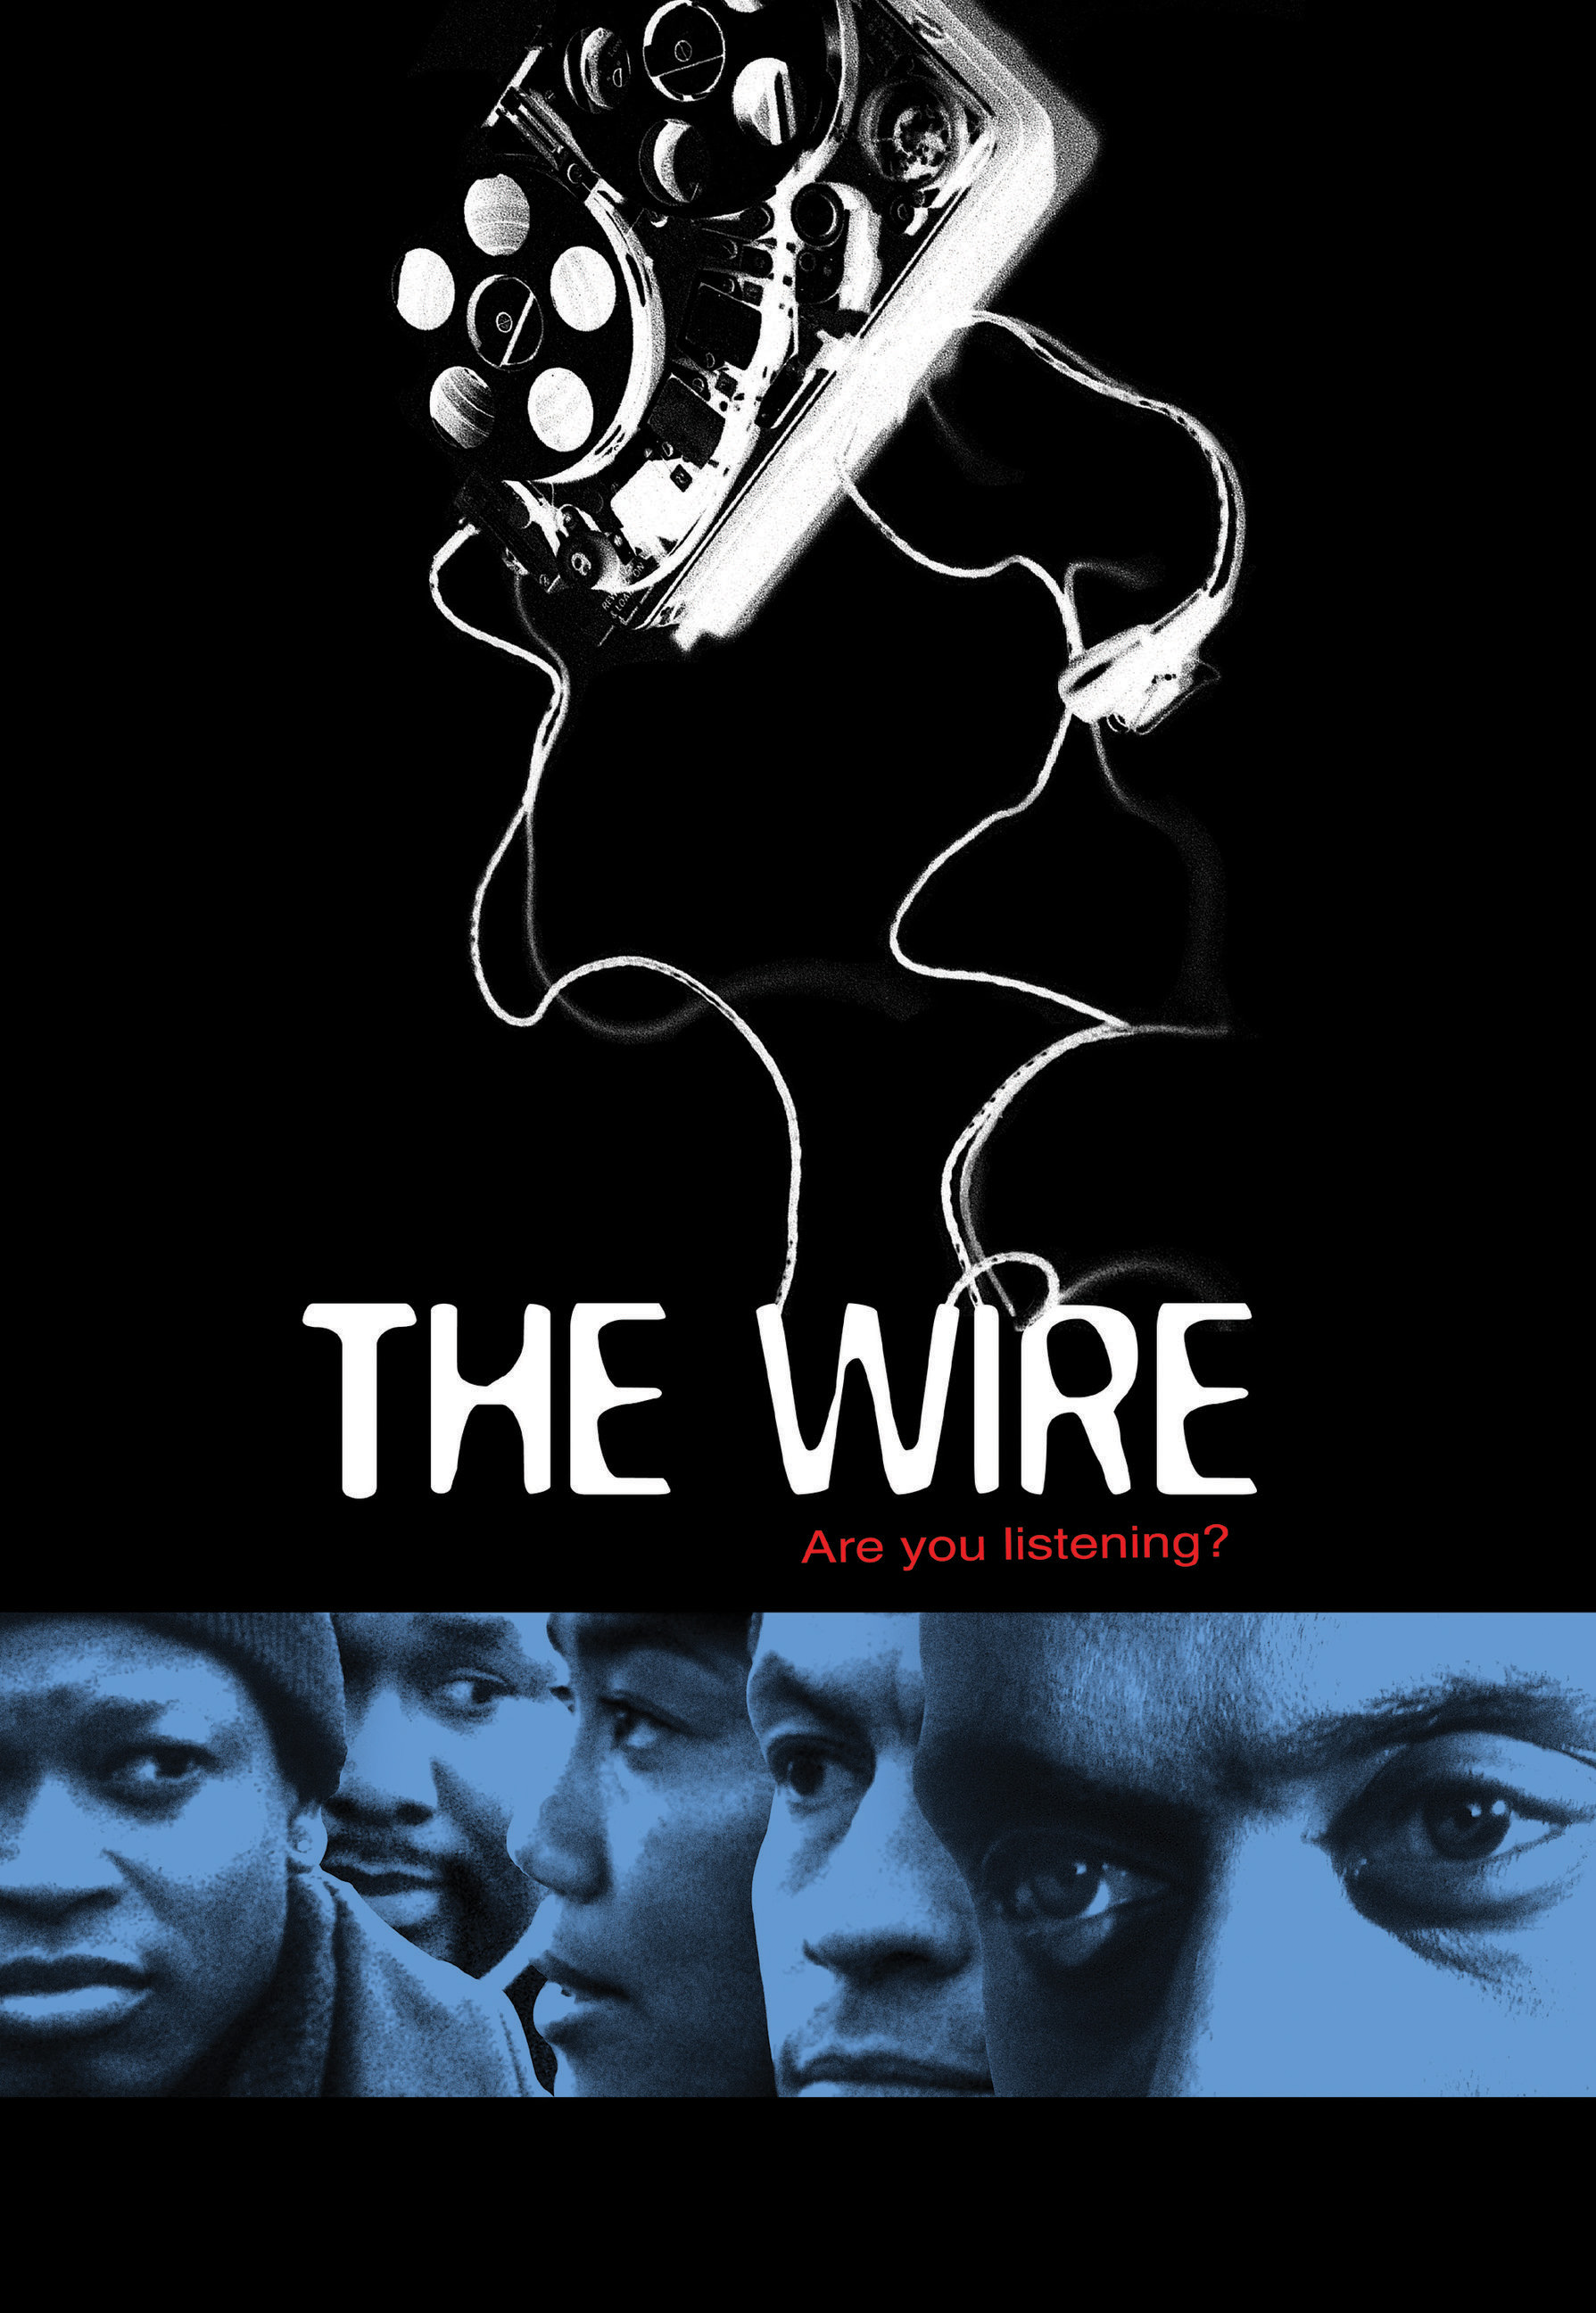 the wire season 1 5 torrent